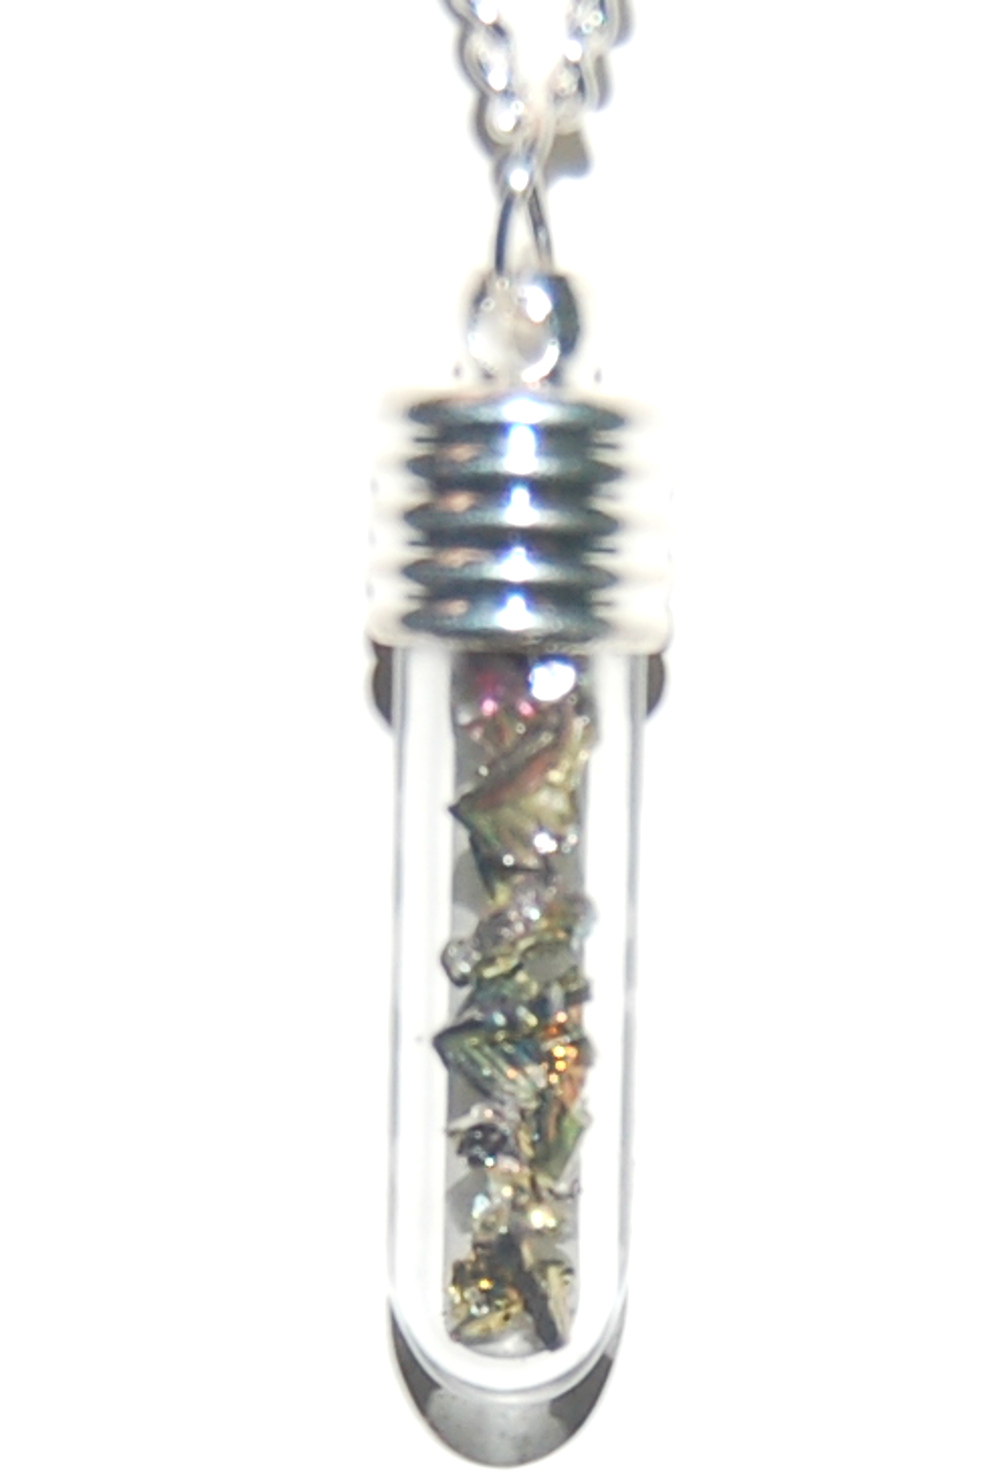 Powerful Bismuth Crystal Pendant on Chain - Brings Spiritual Energy Down th